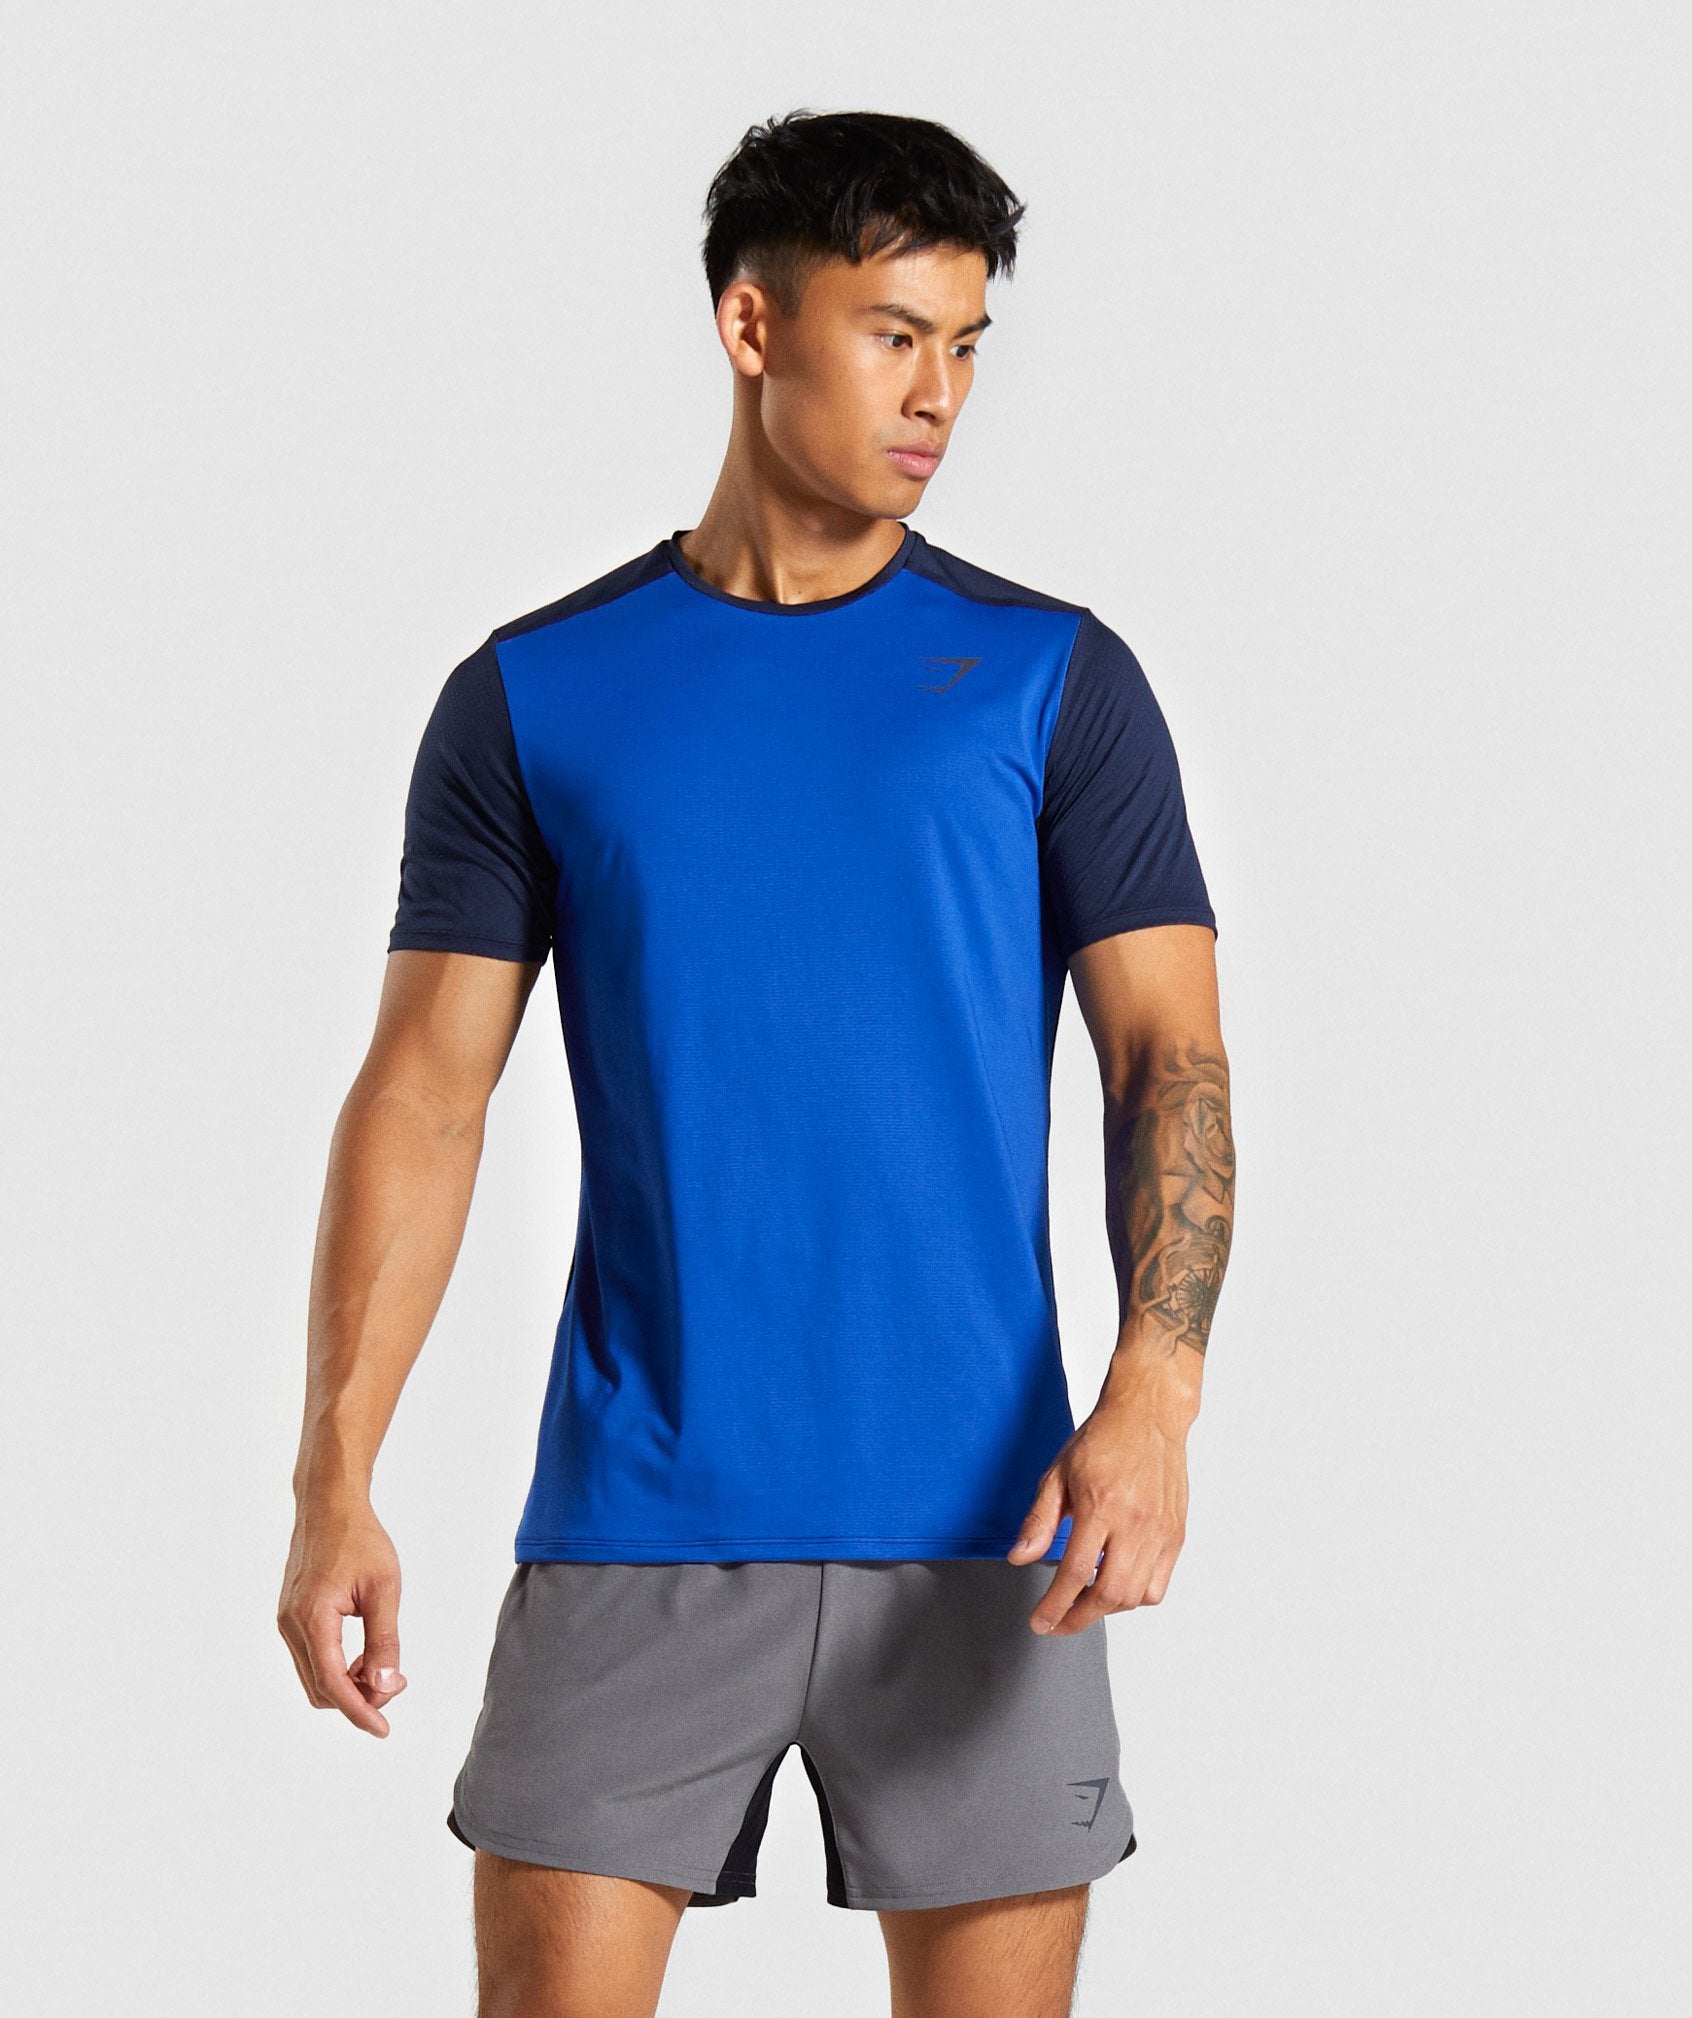 Speed T-Shirt in Blue - view 1